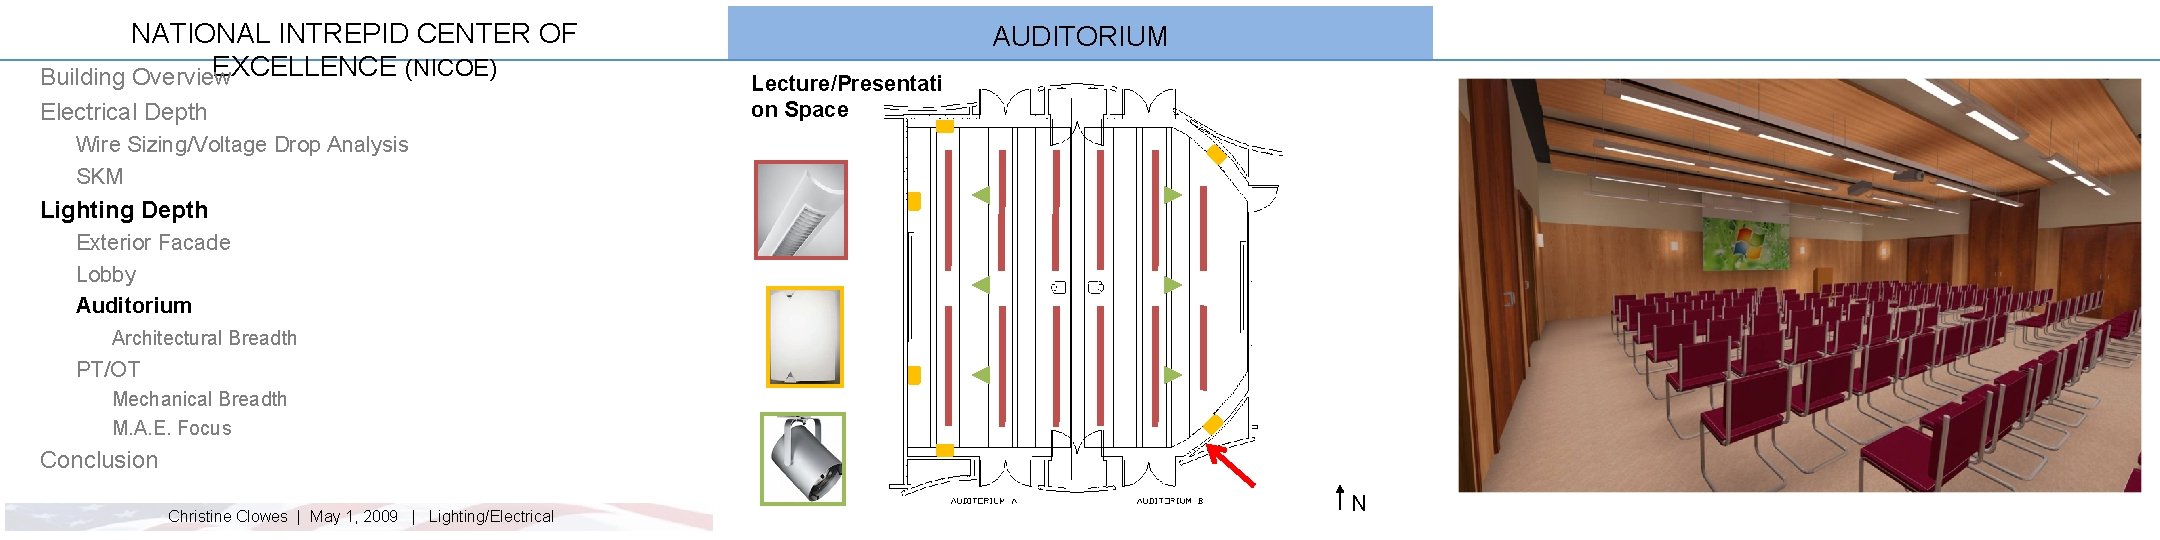 NATIONAL INTREPID CENTER OF EXCELLENCE (NICOE) Building Overview Electrical Depth AUDITORIUM Lecture/Presentati on Space